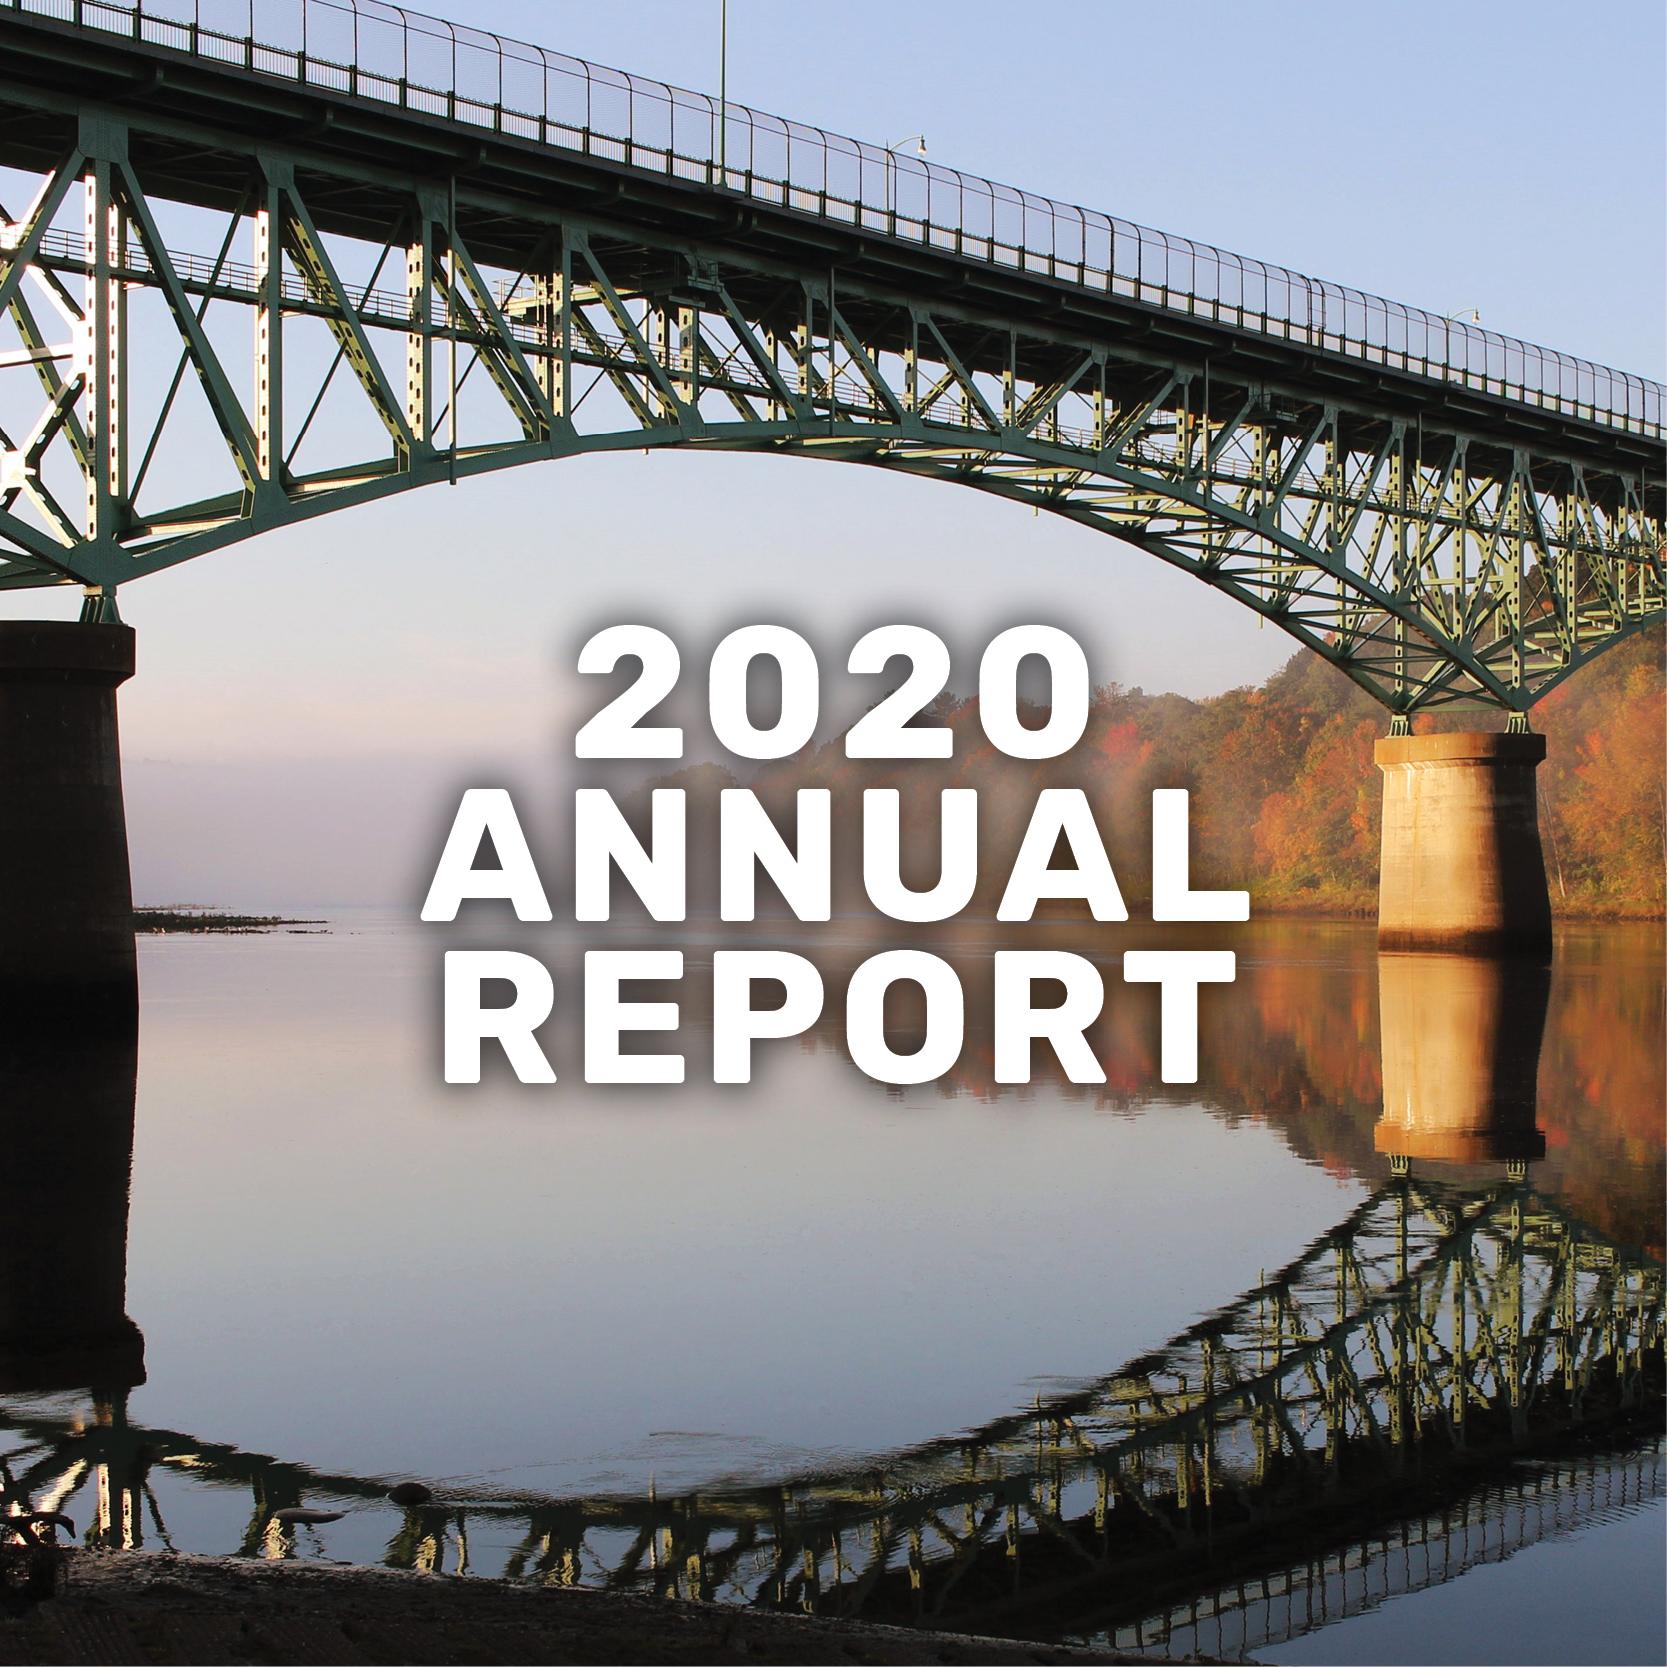 2020 annual report banner